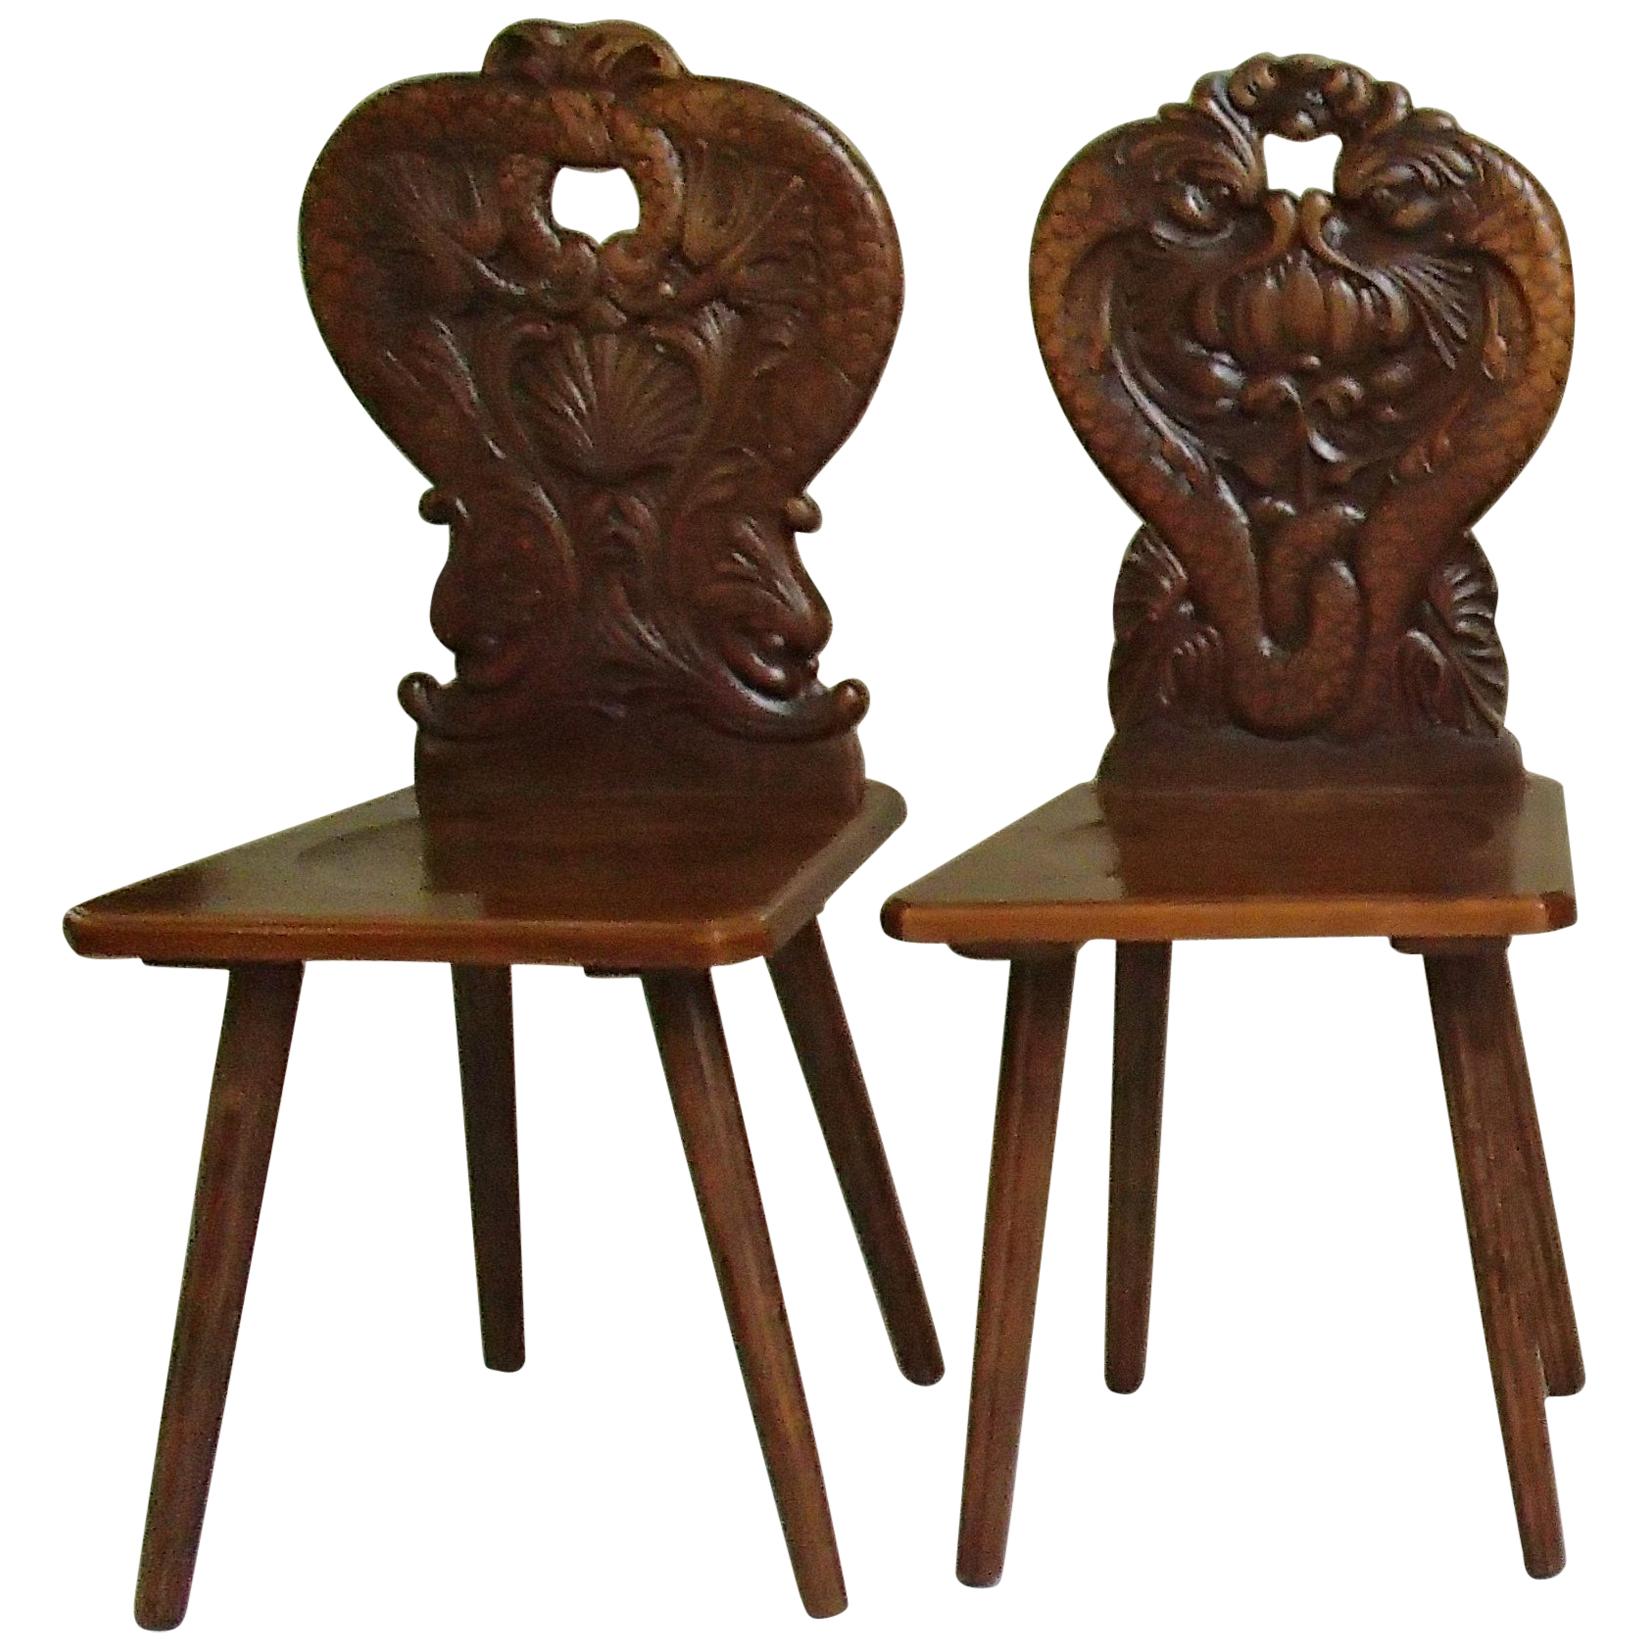 Pair of Brutalist Wooden Chairs Carved with Fabulous Creatures, Dragons